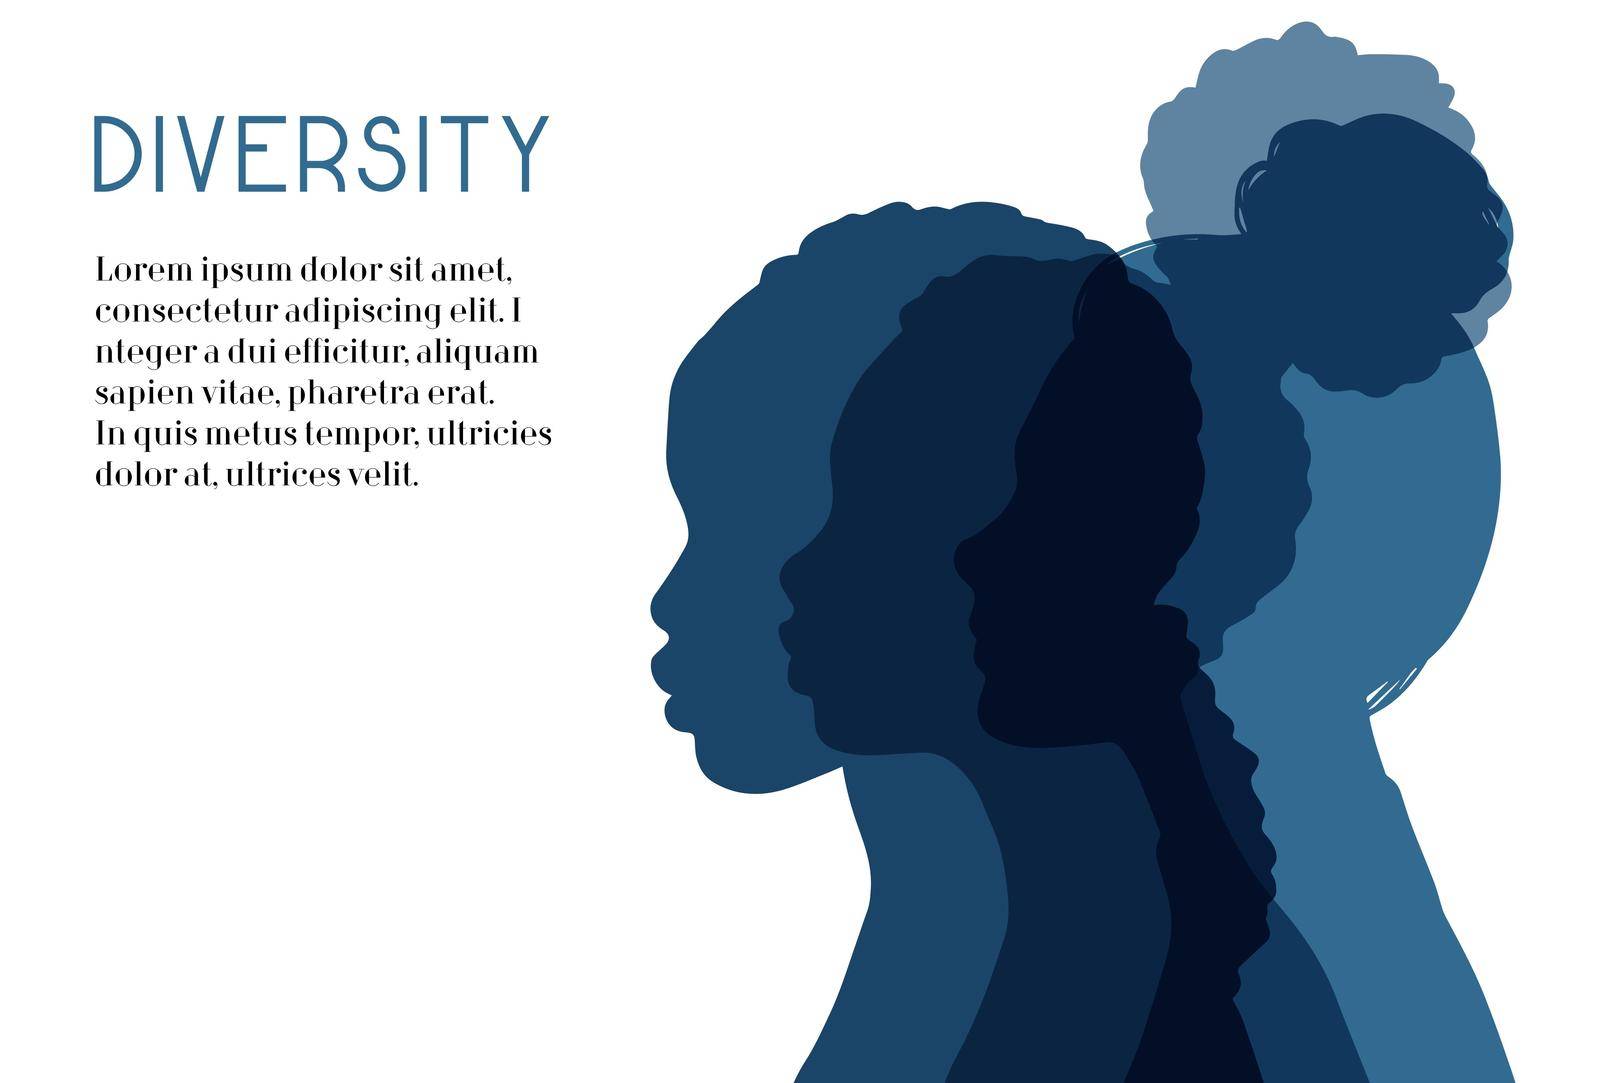 Diversity multiethnic people. Group of people silhouettes with different culture and racial diversity. Multicultural abstract people background. Vector illustration